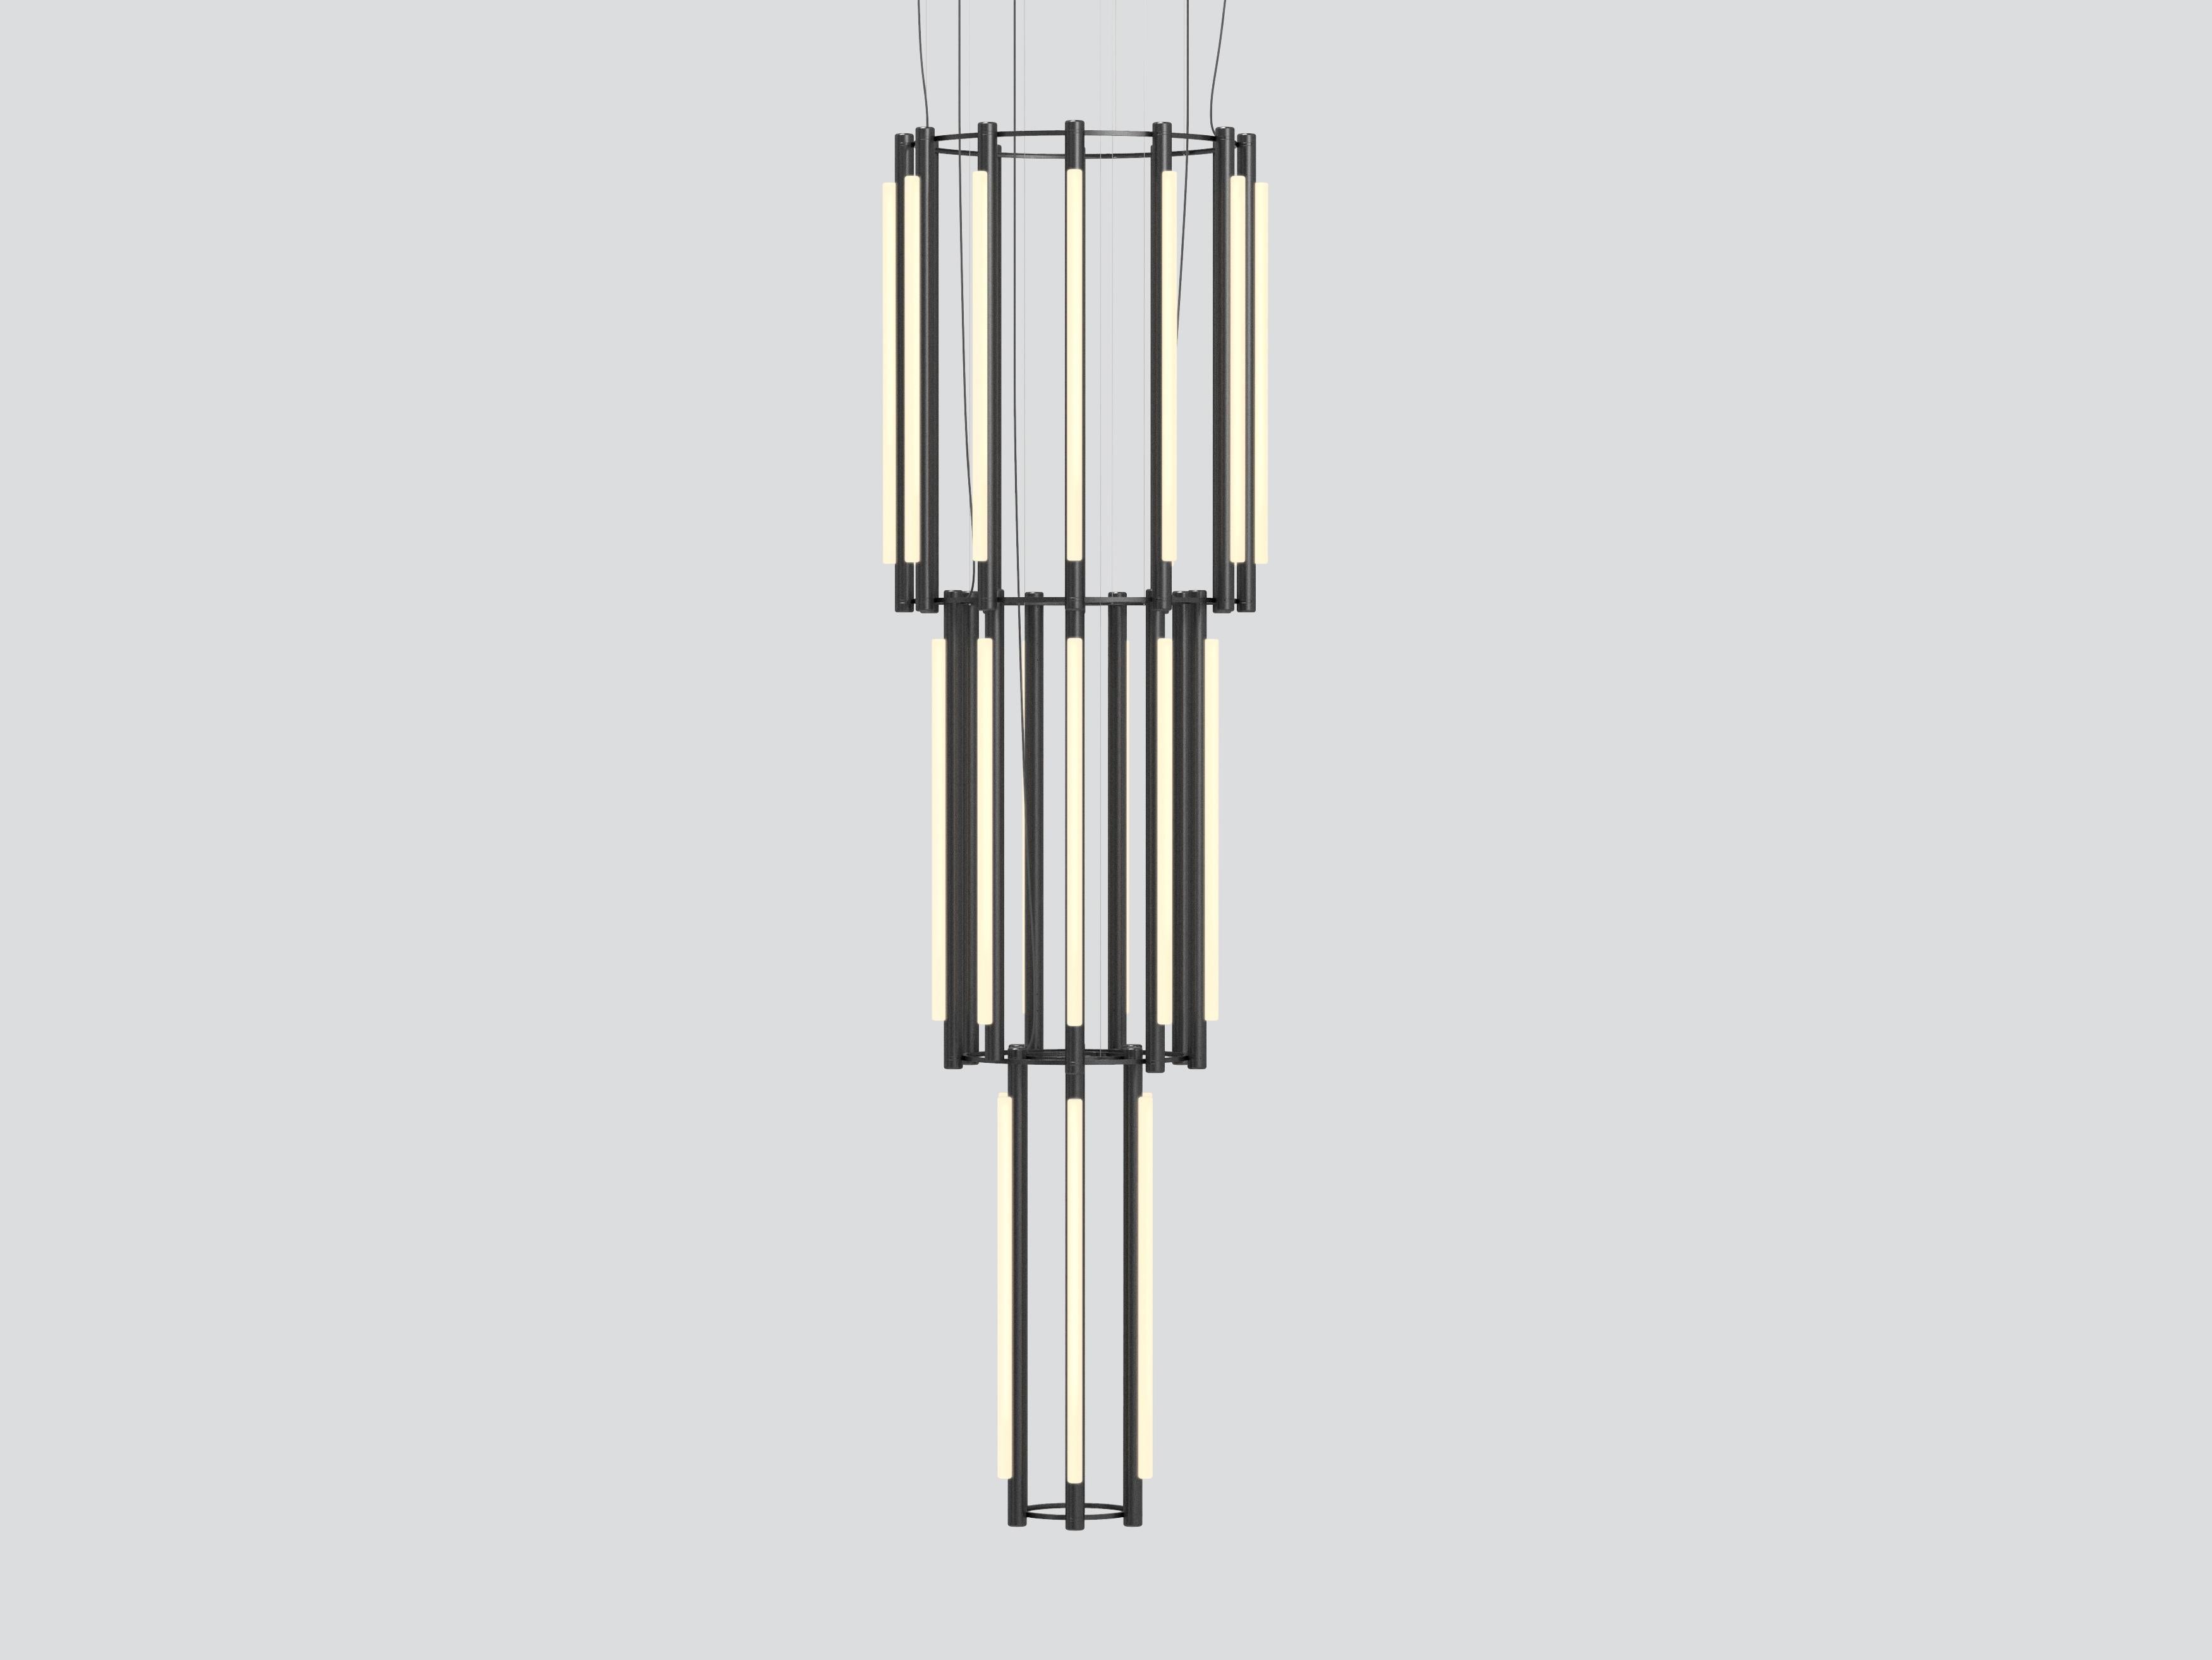 Pipeline chandelier 12 – pendant
by Caine Heintzman

Materials
– aluminum body
– cast acrylic

Electrical
– 27 x 15W LED
– 47,000 hour Lifetime
– 90+ CRI
– Input Voltage 100–240V + 277V
– Integral 24V DC power supply included
– Dimming